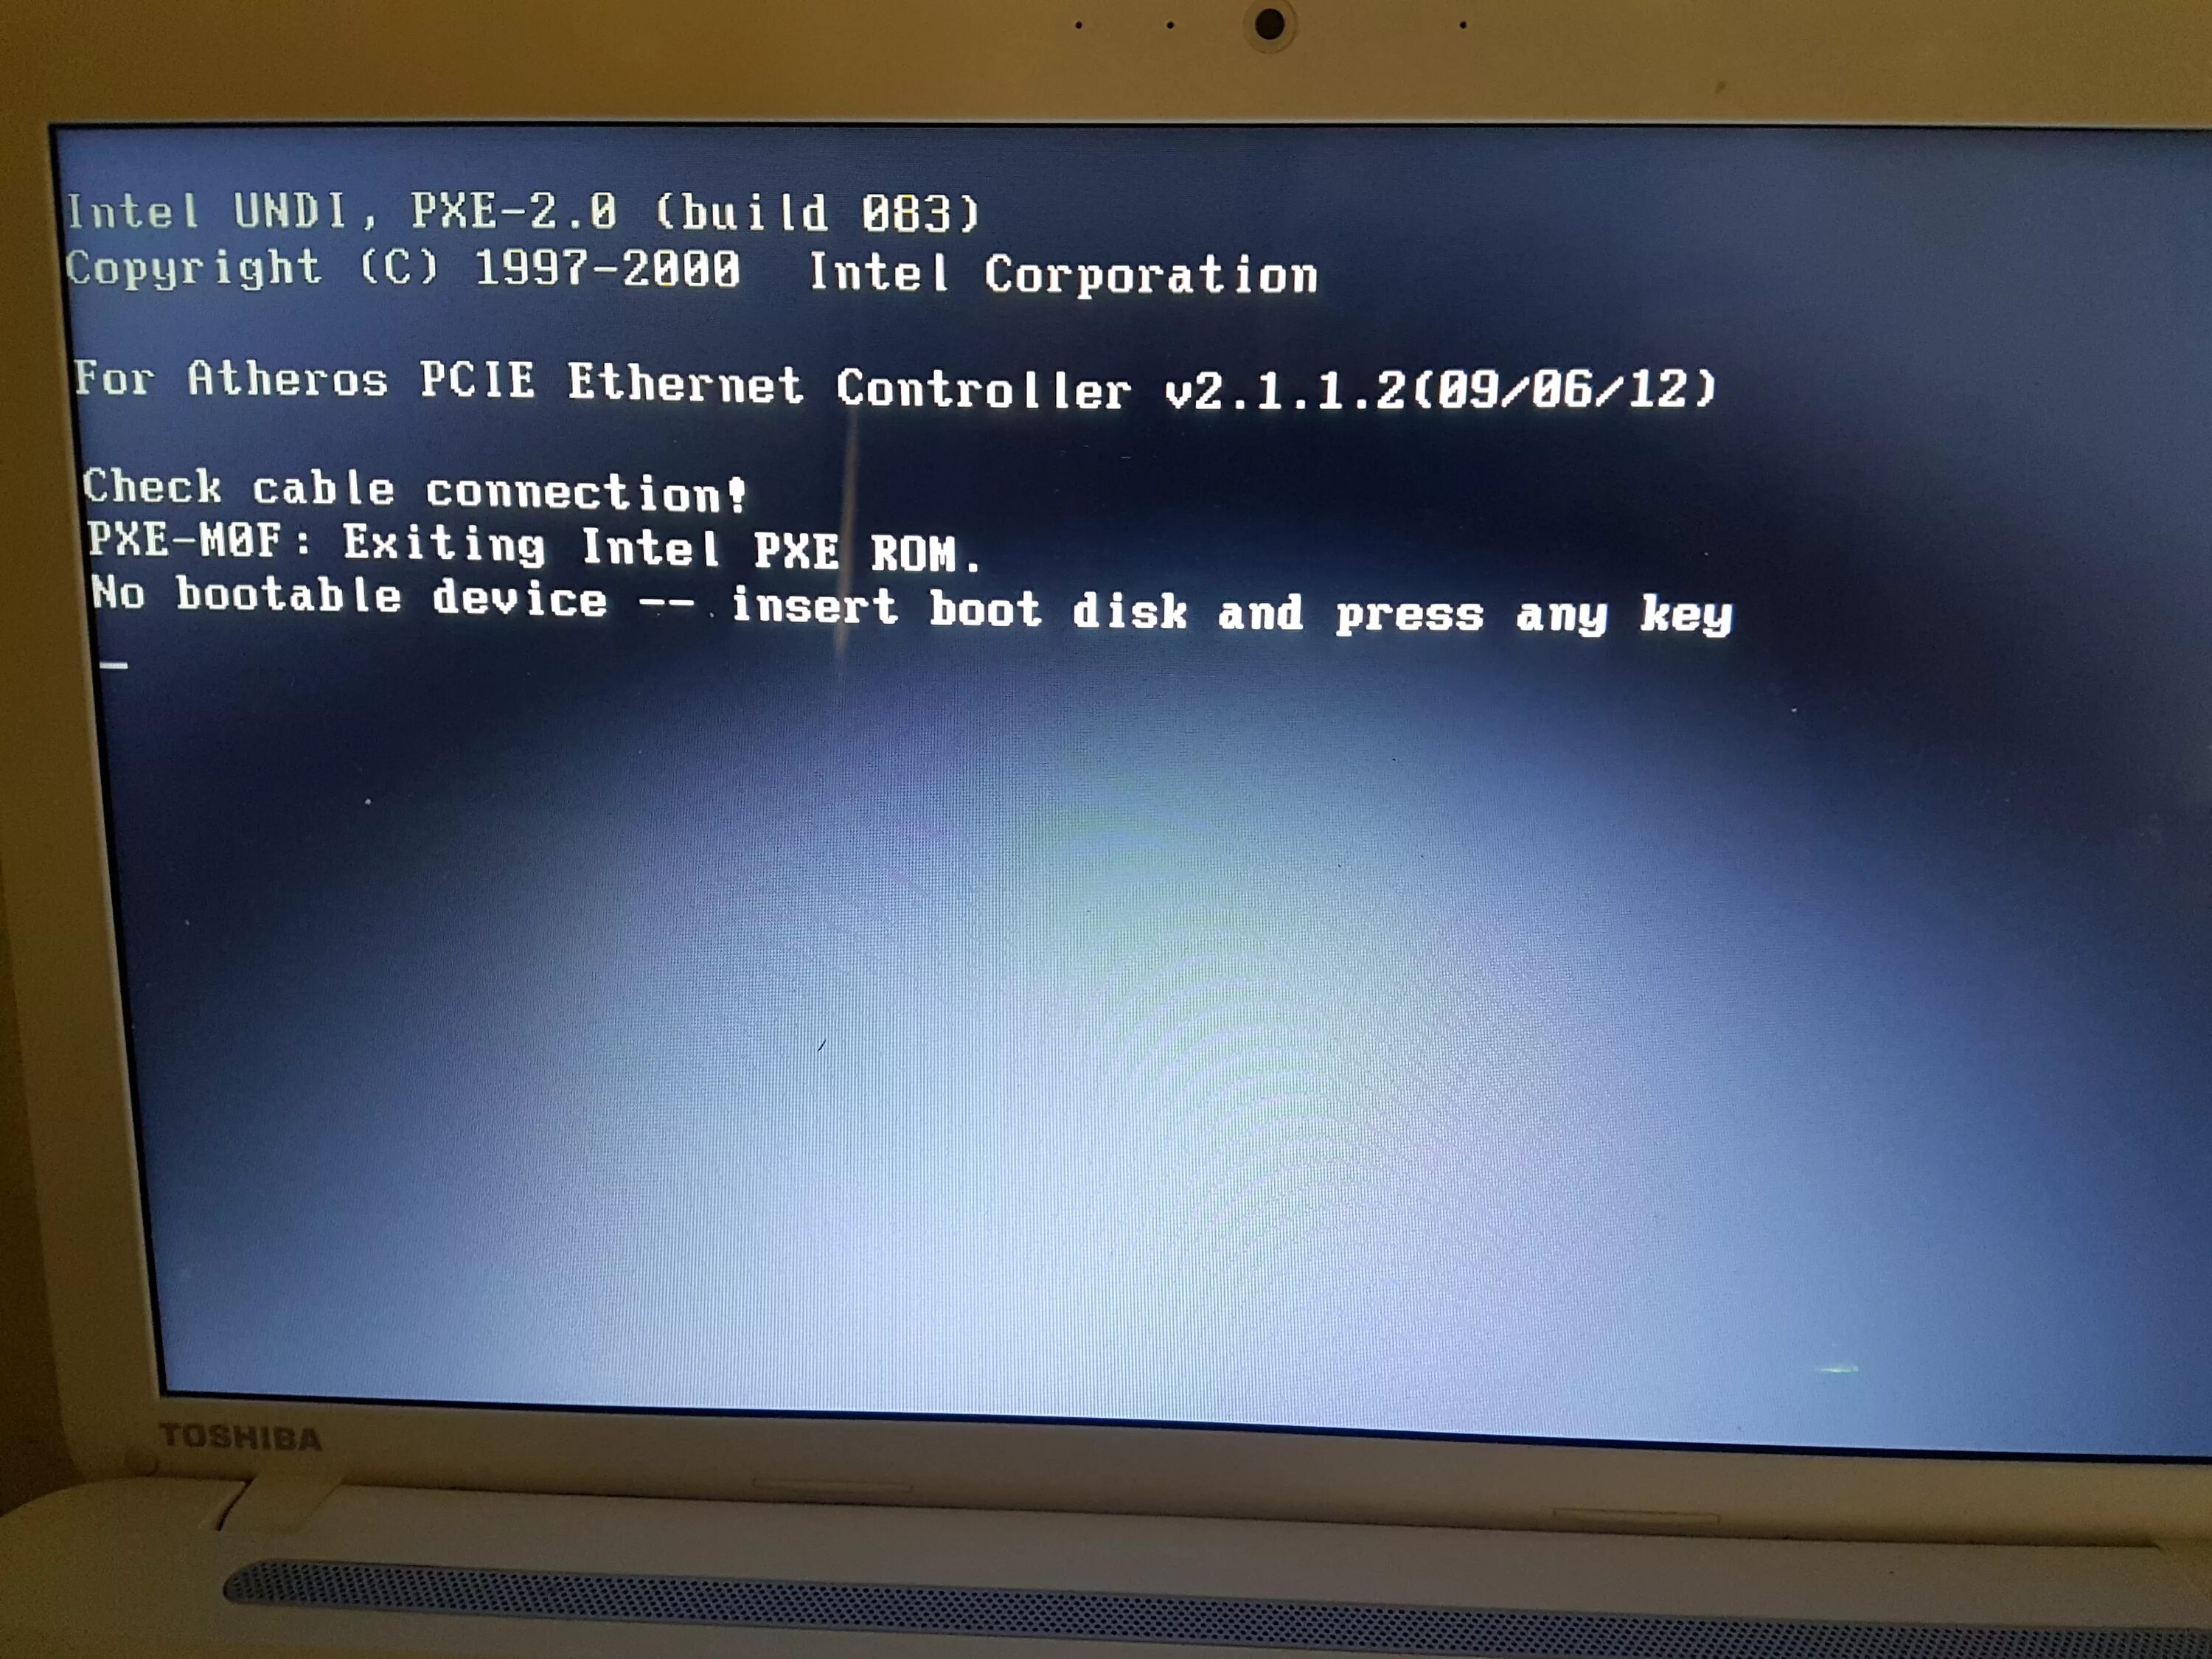 Ошибка no Bootable device на ноутбуке. Ошибка на ноутбуке no Bootable device Insert Boot Disk and Press any Key. PXE MOF exiting PXE ROM на ноутбуке Lenovo. PXE-MOF exiting PXE ROM на ноутбуке. No bootable system